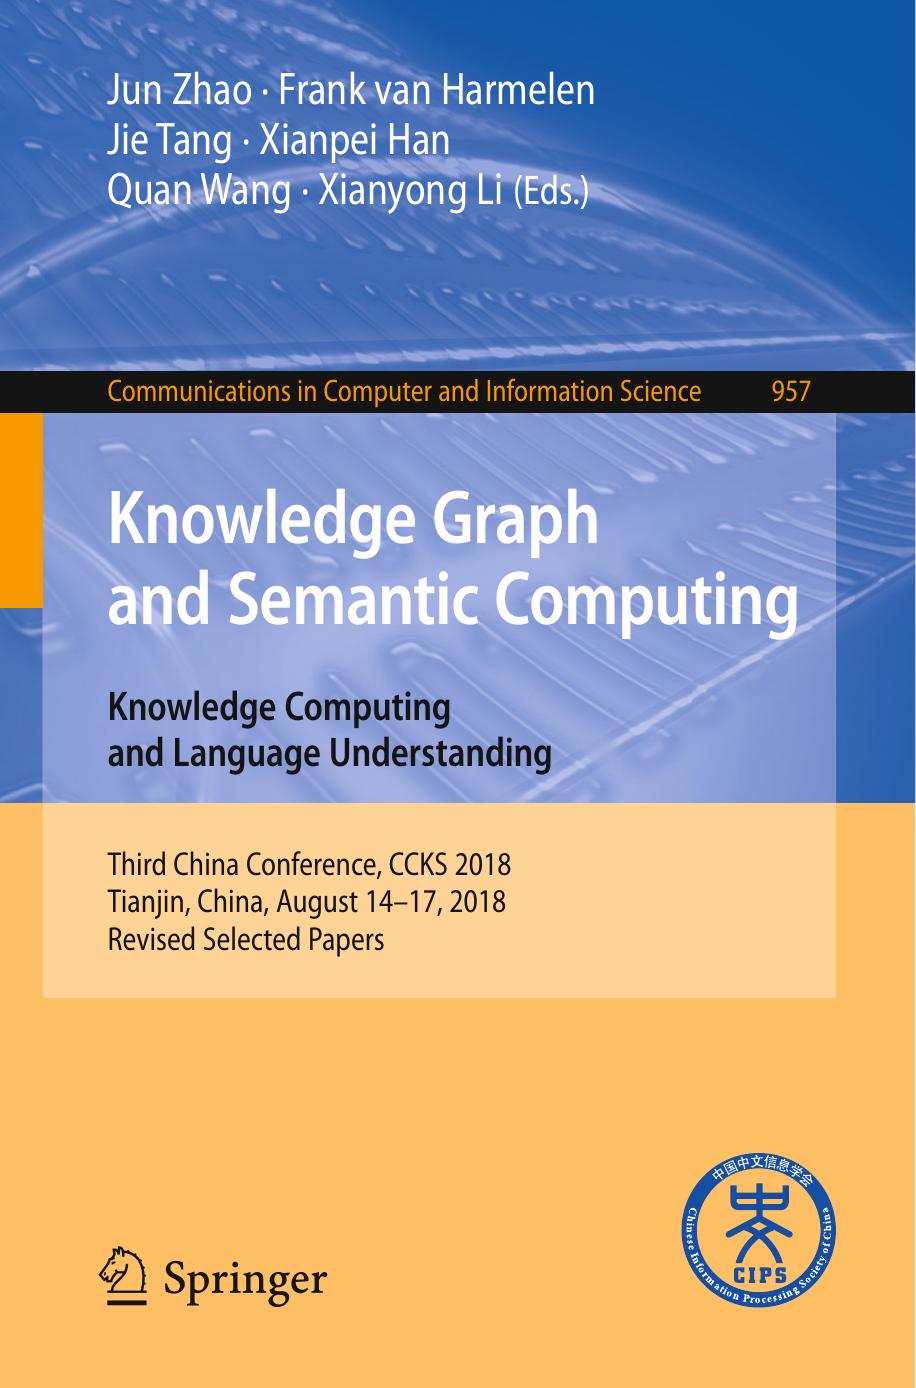 Knowledge Graph and Semantic Computing. Knowledge Computing and Language Understanding: Third China Conference, CCKS 2018, Tianjin, China, August 14–17, 2018, Revised Selected Papers